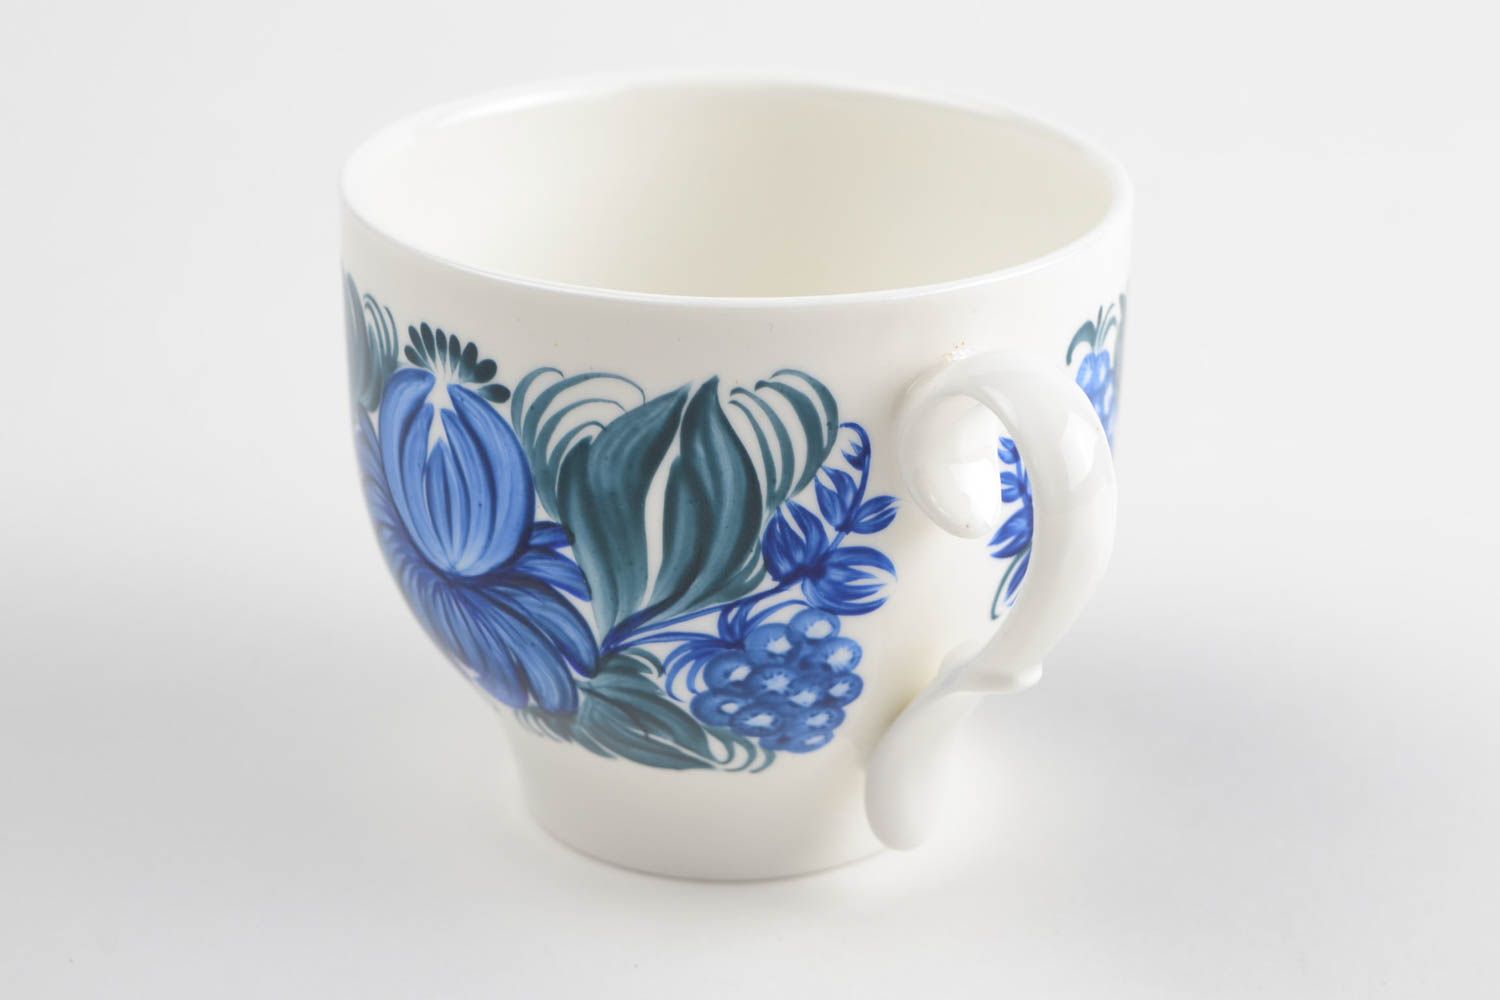 6 oz ceramic porcelain white and blue cup with handle and flower pattern photo 4